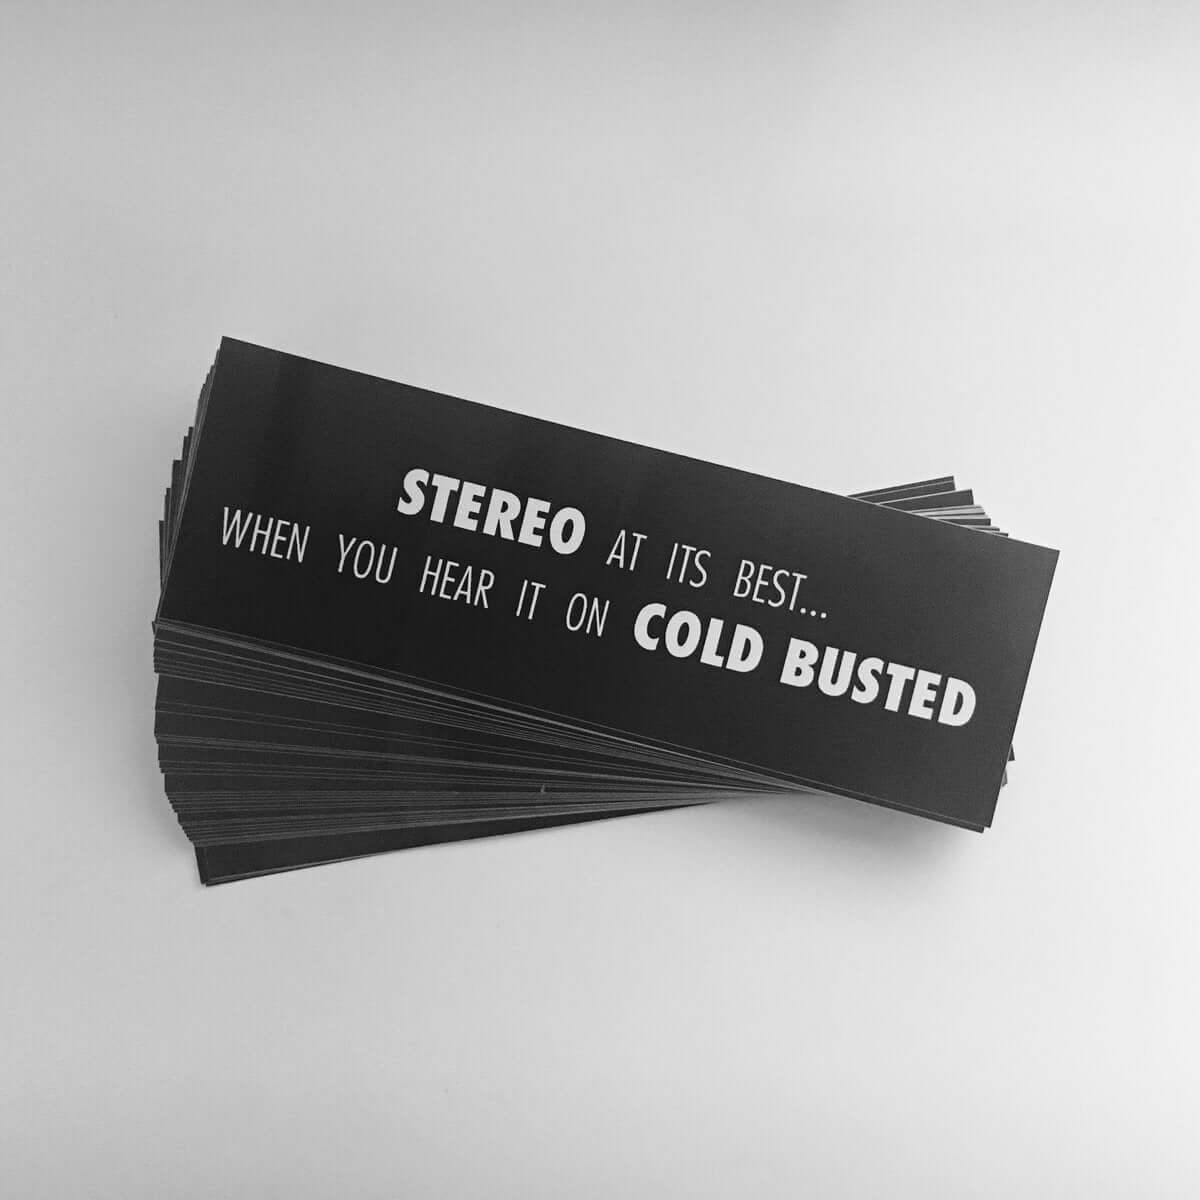 Stereo At Its Best...Sticker (2016) - - Cold Busted